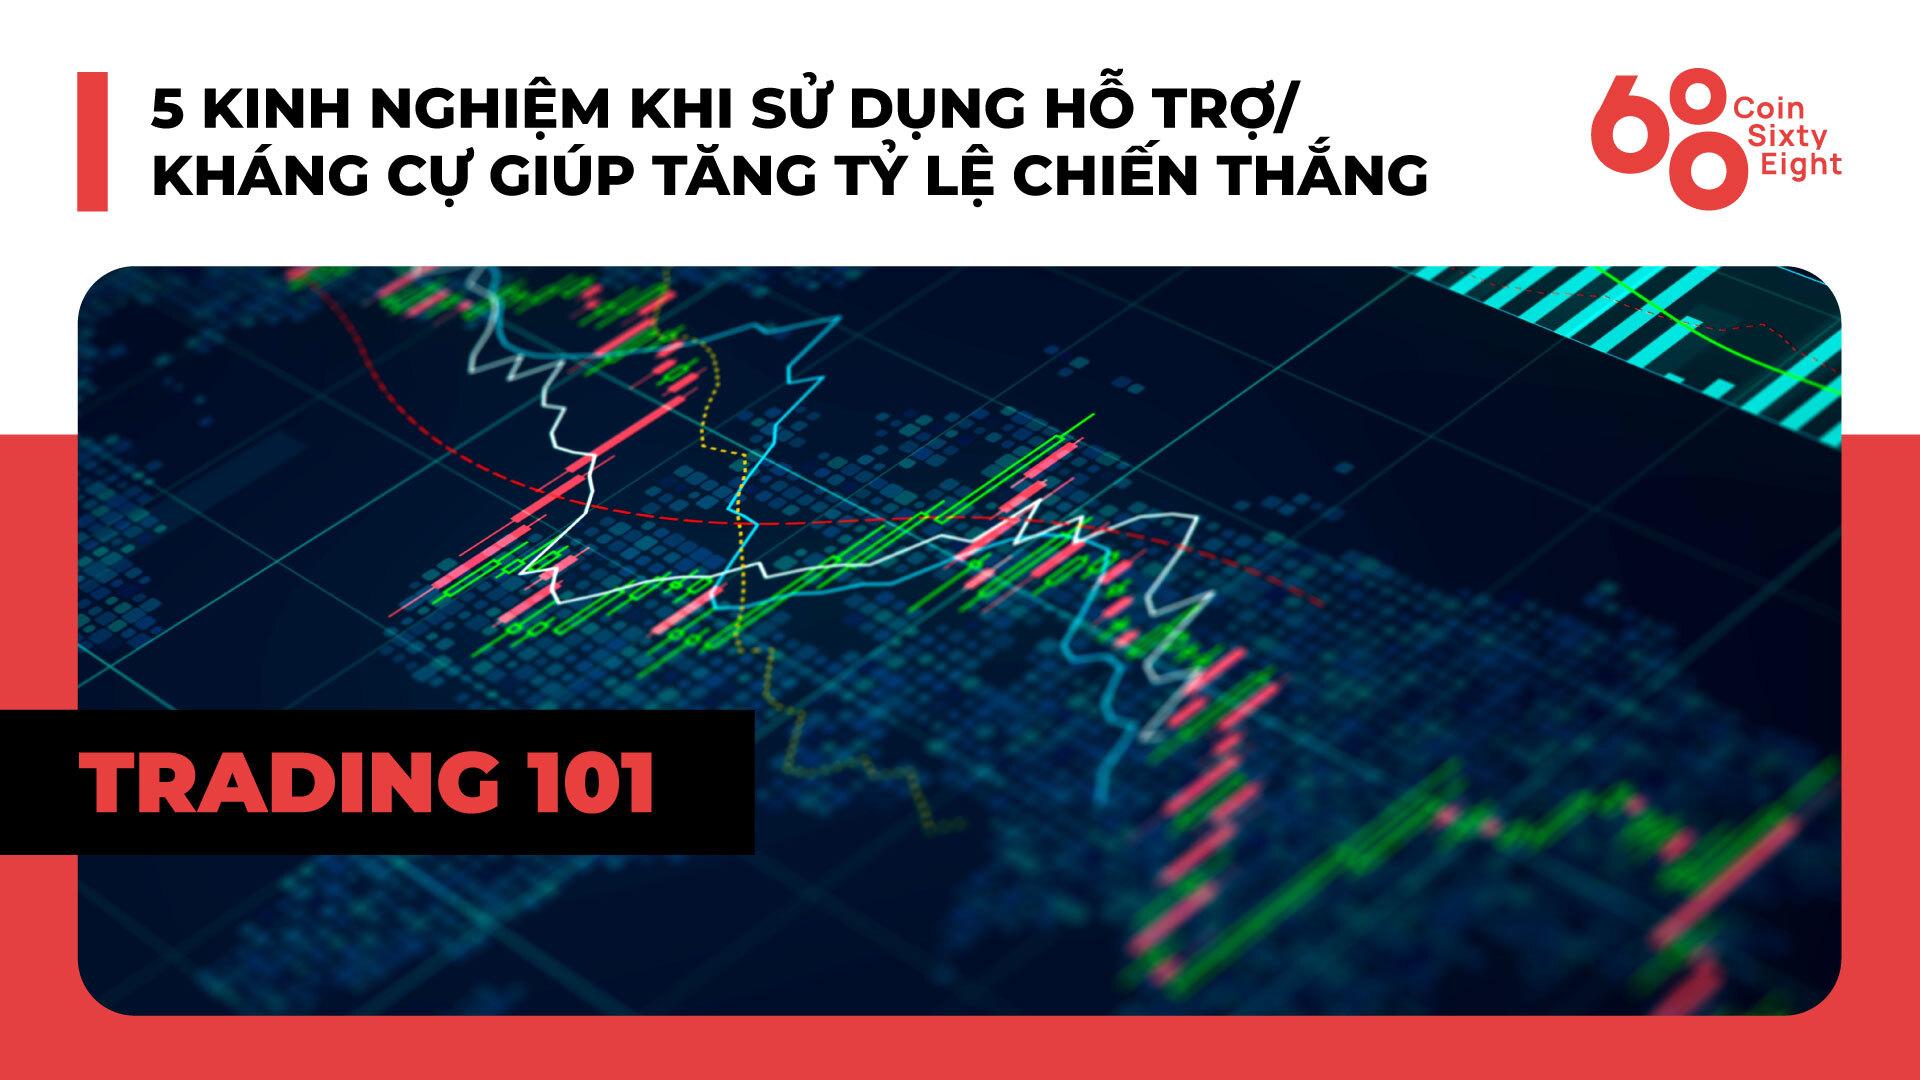 lop-giao-dich-101-price-action-trading-phan-19-5-kinh-nghiem-khi-su-dung-ho-trokhang-cu-giup-tang-ty-le-chien-thang